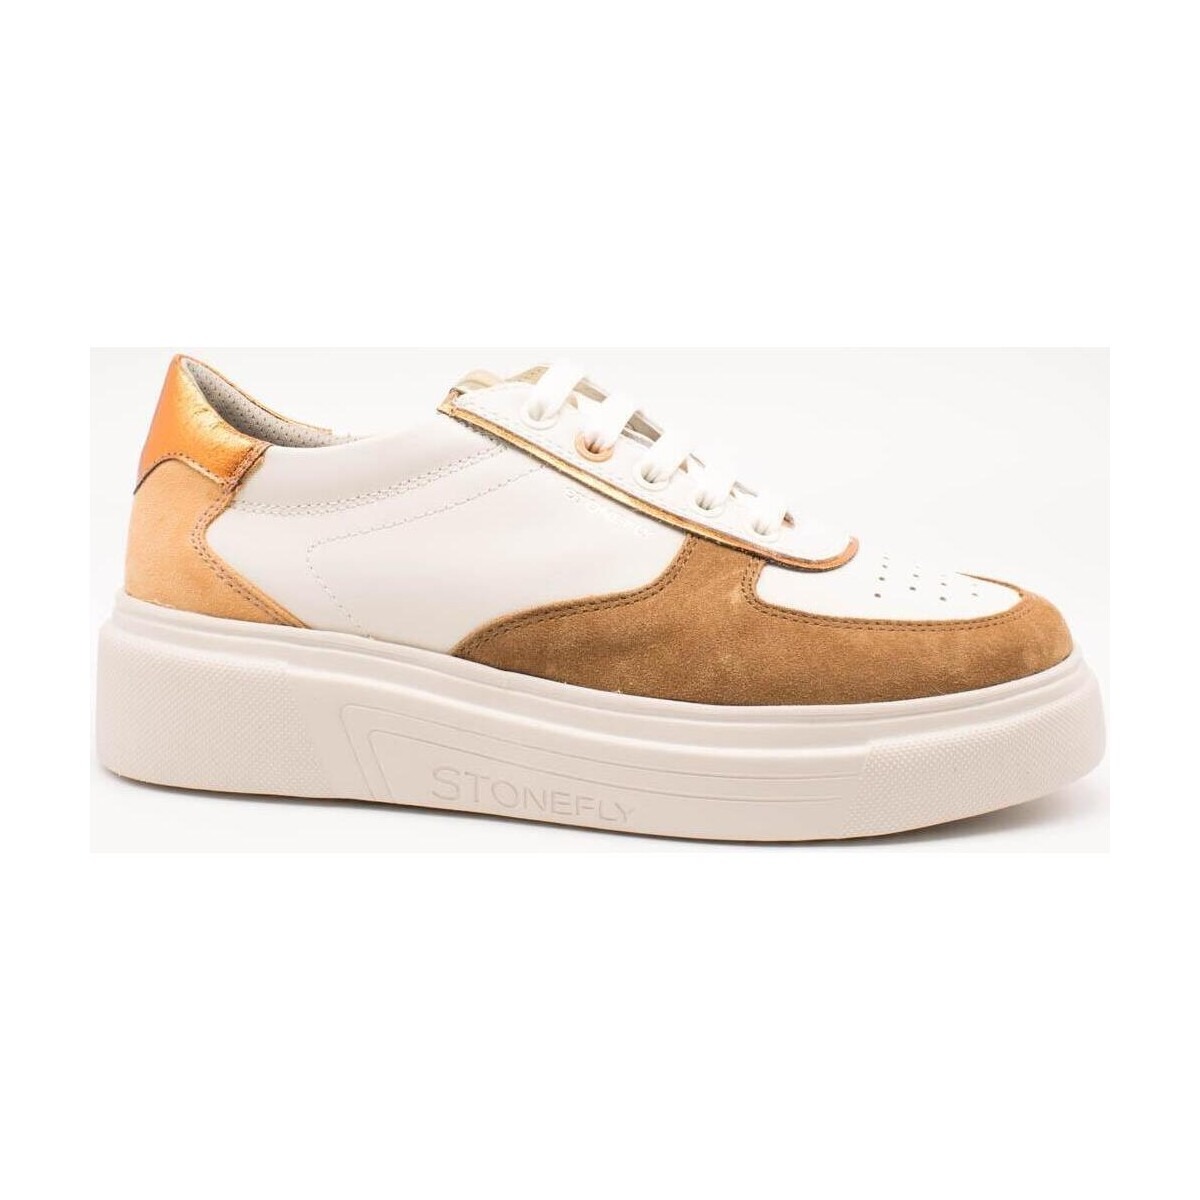 Stonefly Ladies Sneakers in White at Spartoo GOOFASH